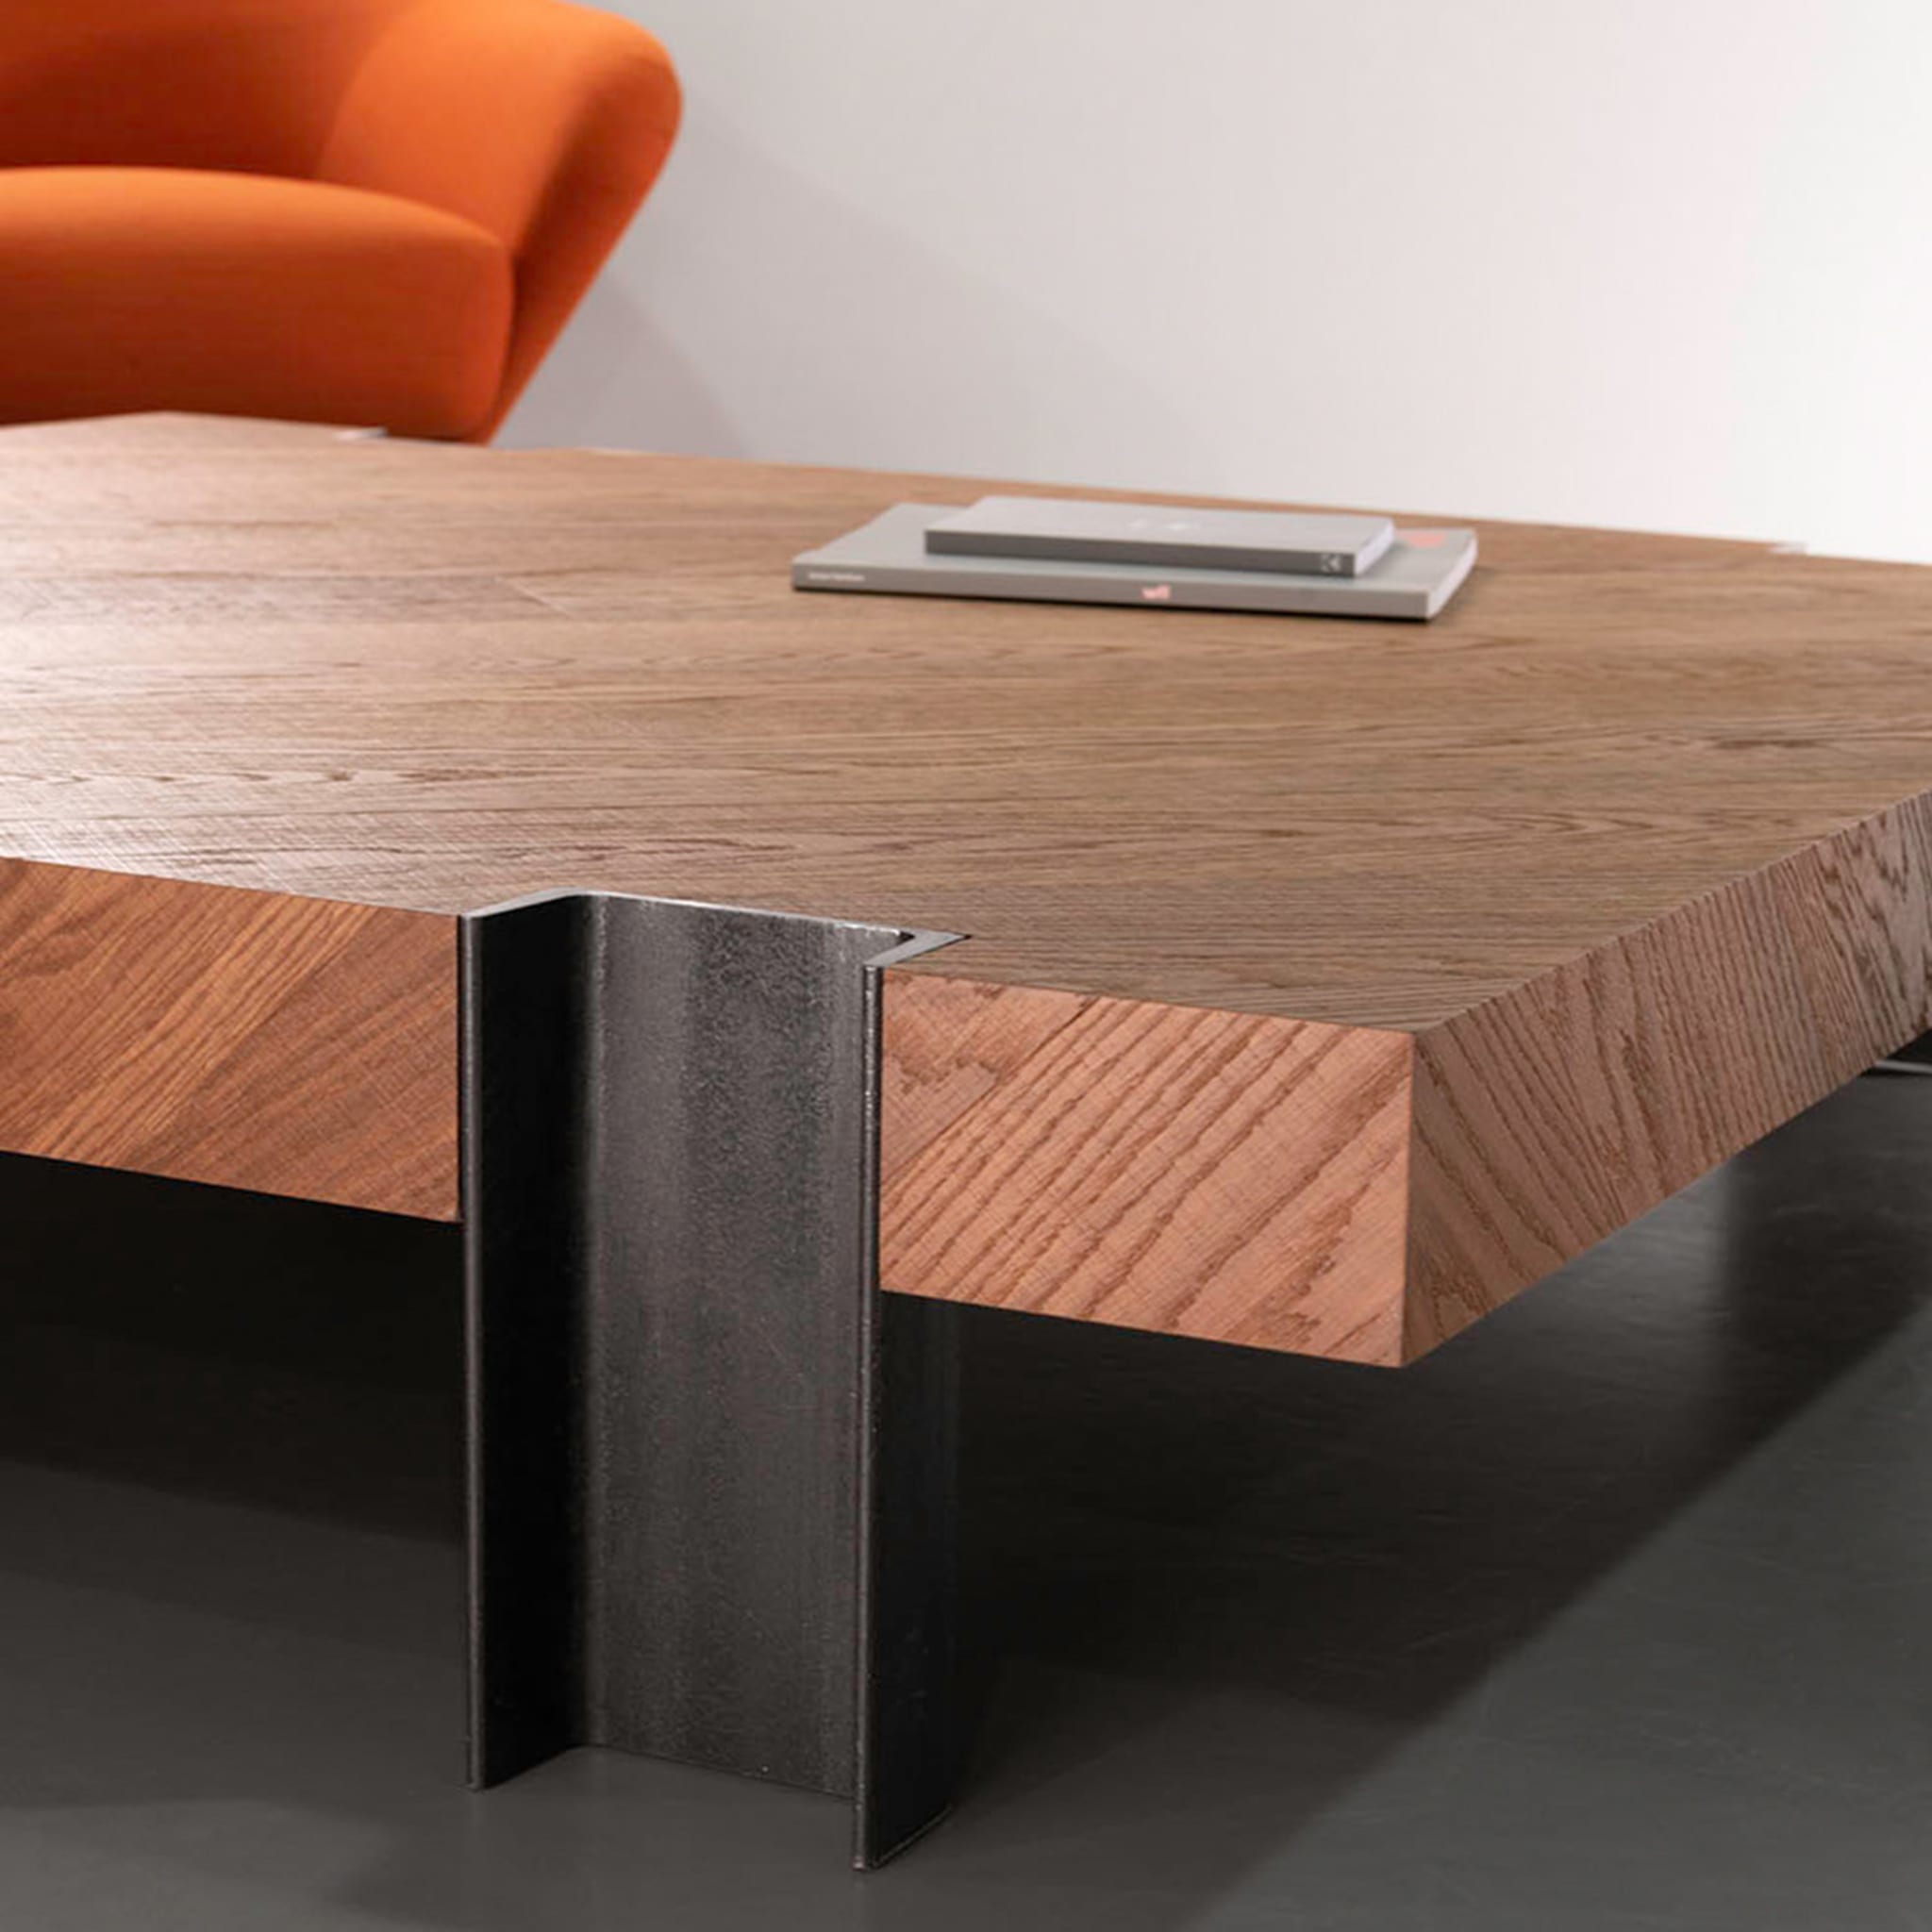 T50 Coffee Table by Jean-Michel Wilmotte - Alternative view 4